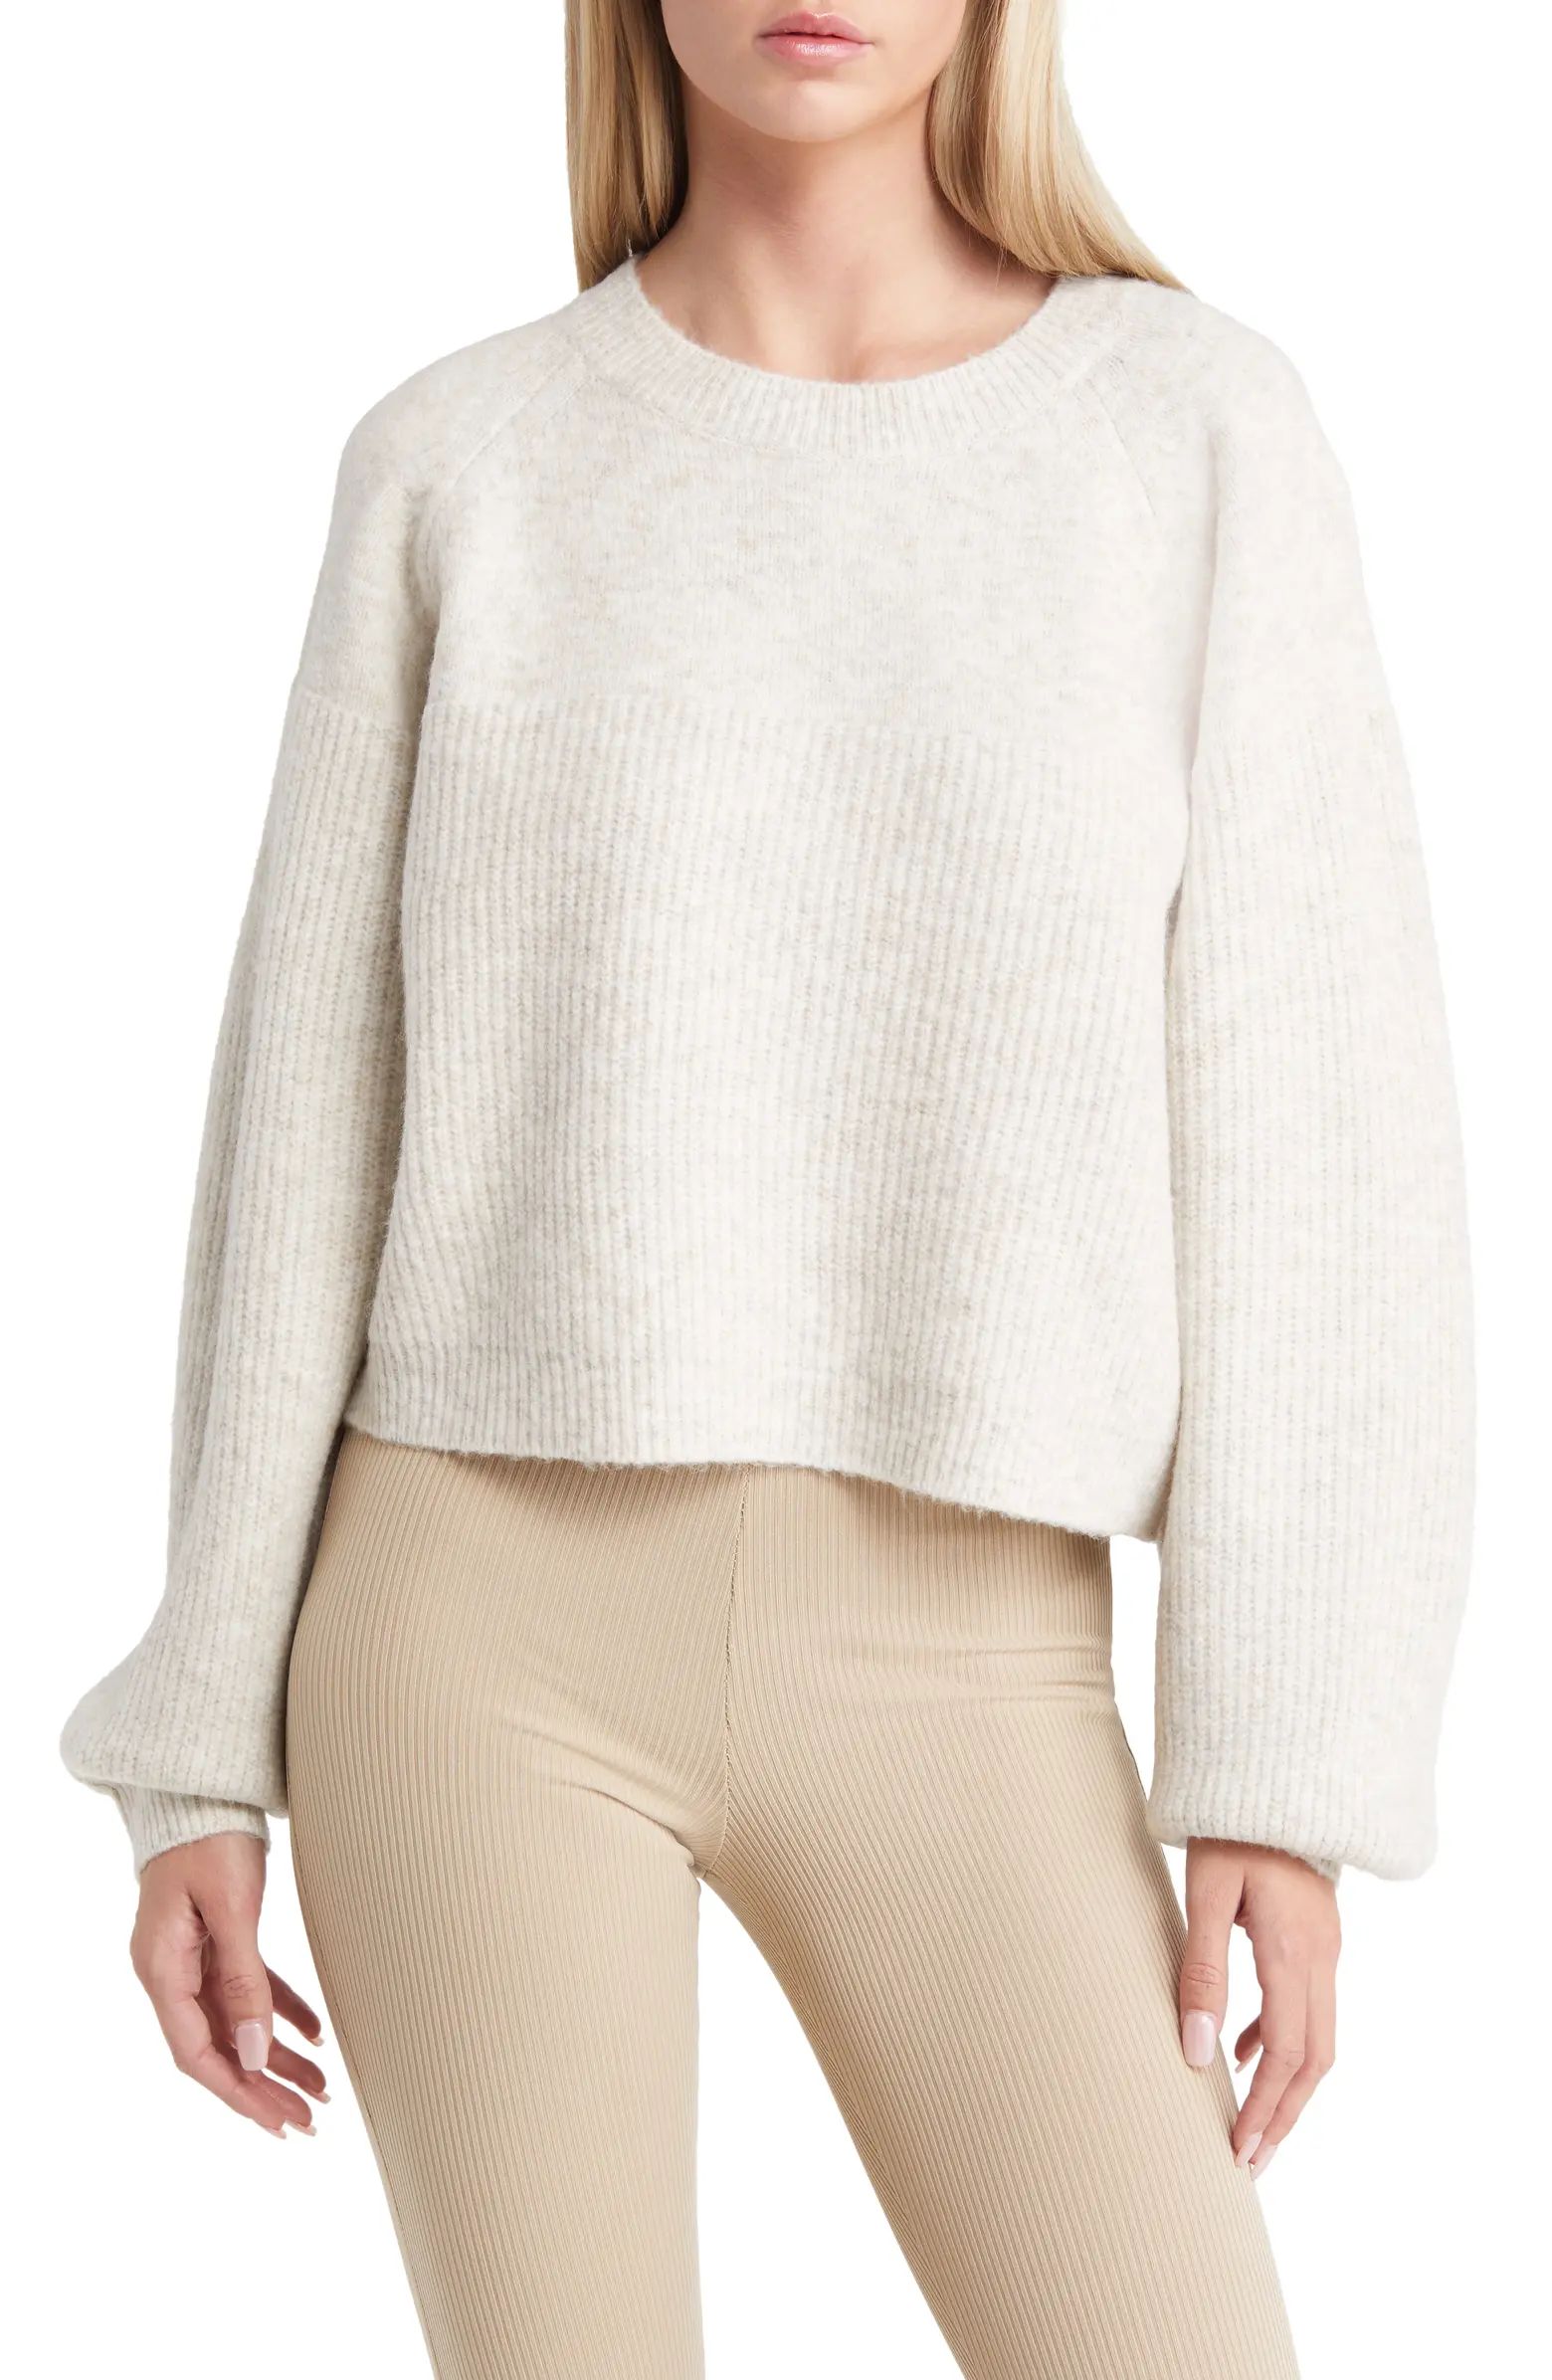 Topshop Mixed Stitch Balloon Sleeve Crop Sweater | Nordstrom | Nordstrom